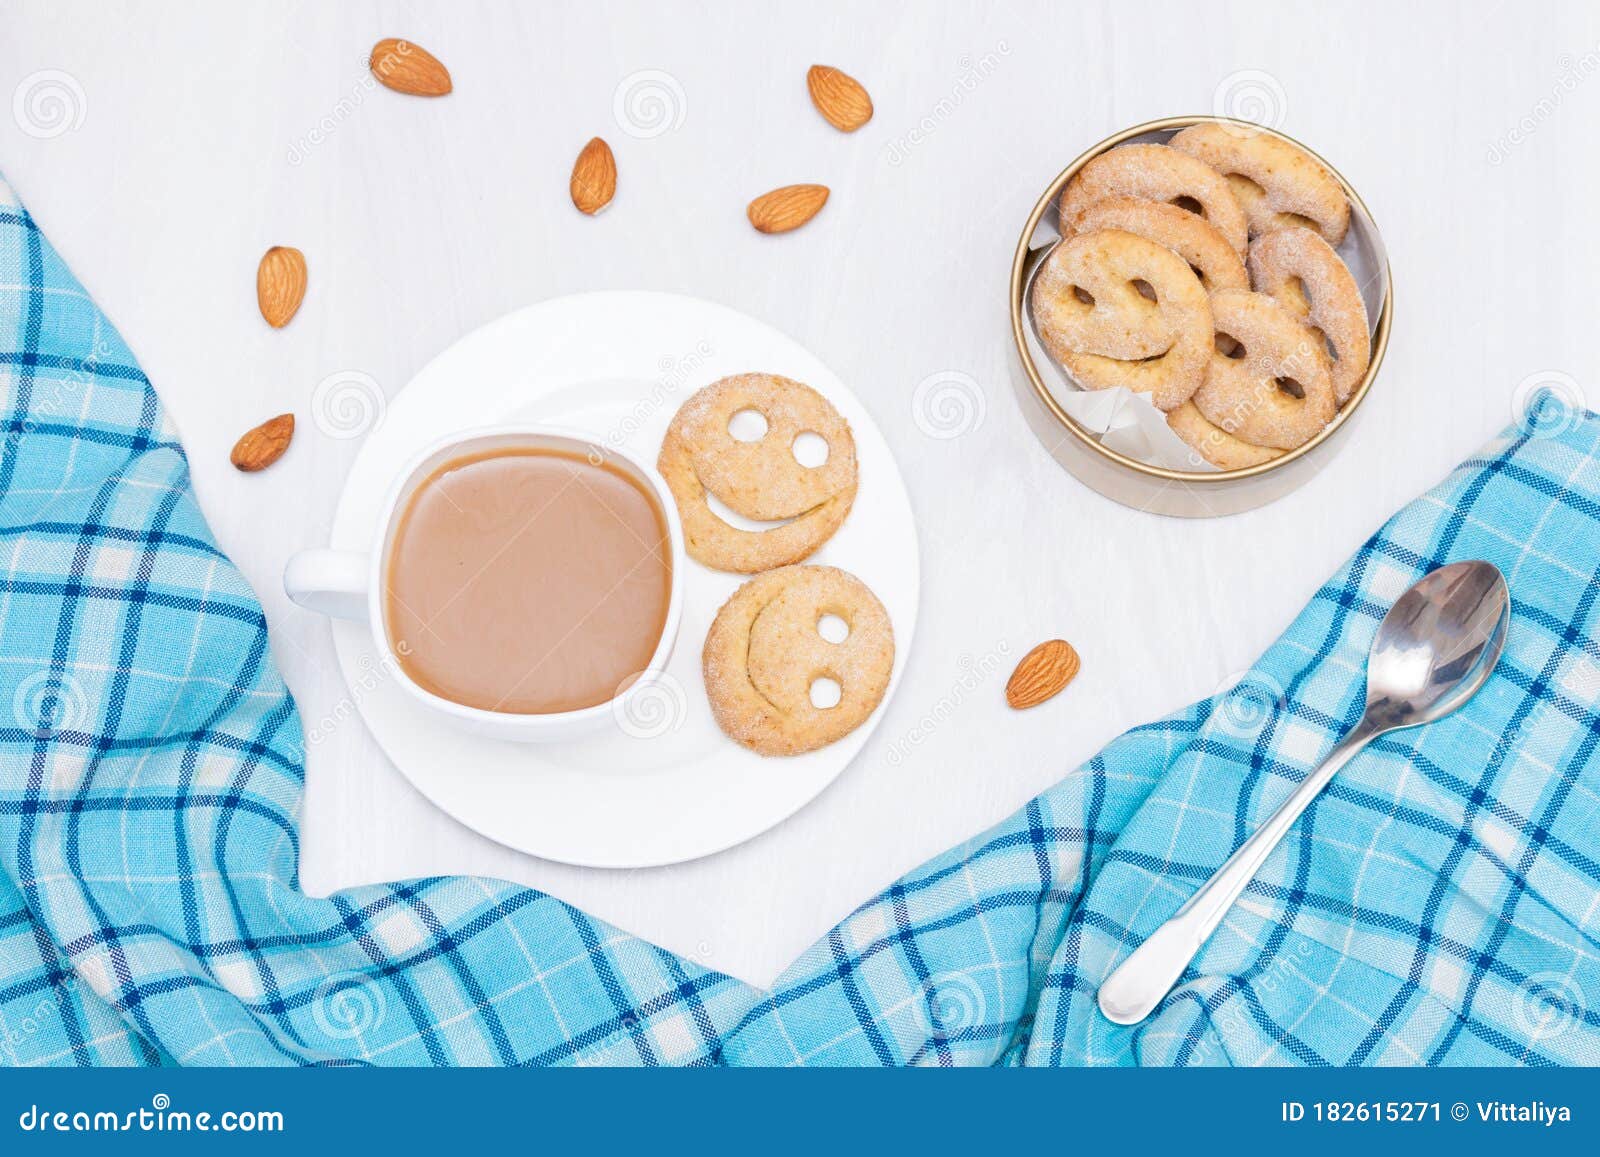 Homemade Smile Cookies with Cup of Coffee on White Wooden ...